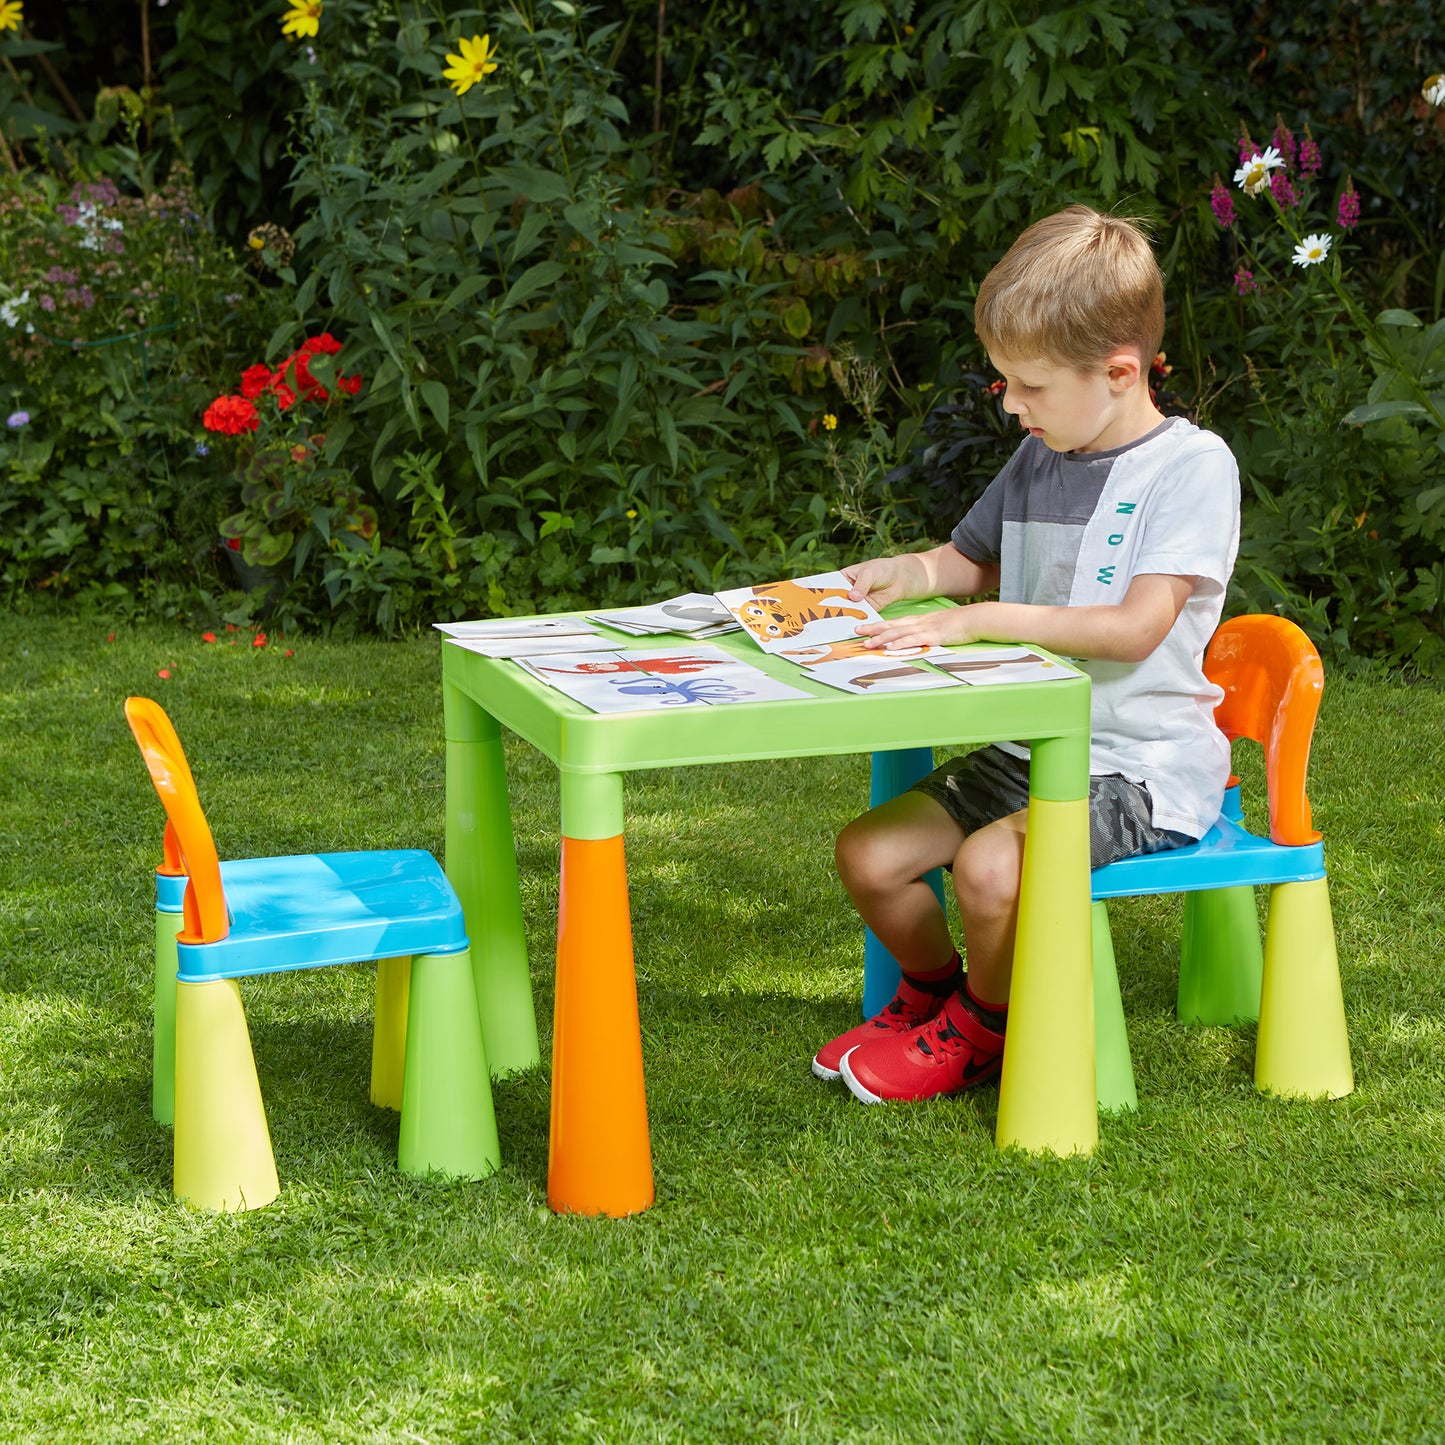 Multipurpose 3-in-1 Activity Table and Chairs Set